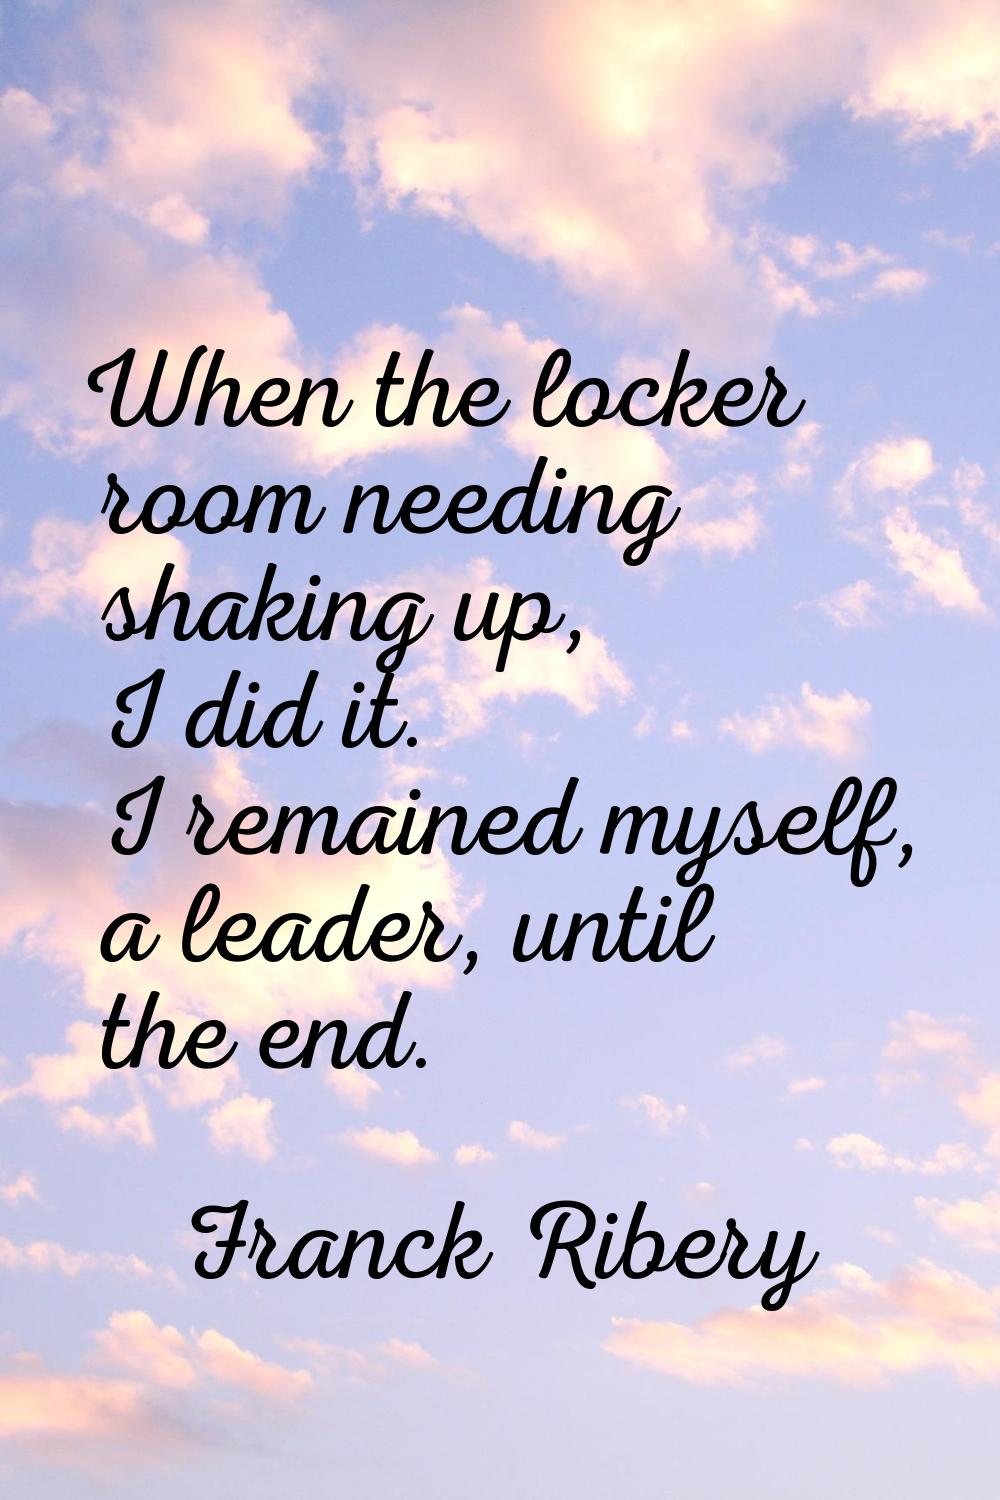 When the locker room needing shaking up, I did it. I remained myself, a leader, until the end.